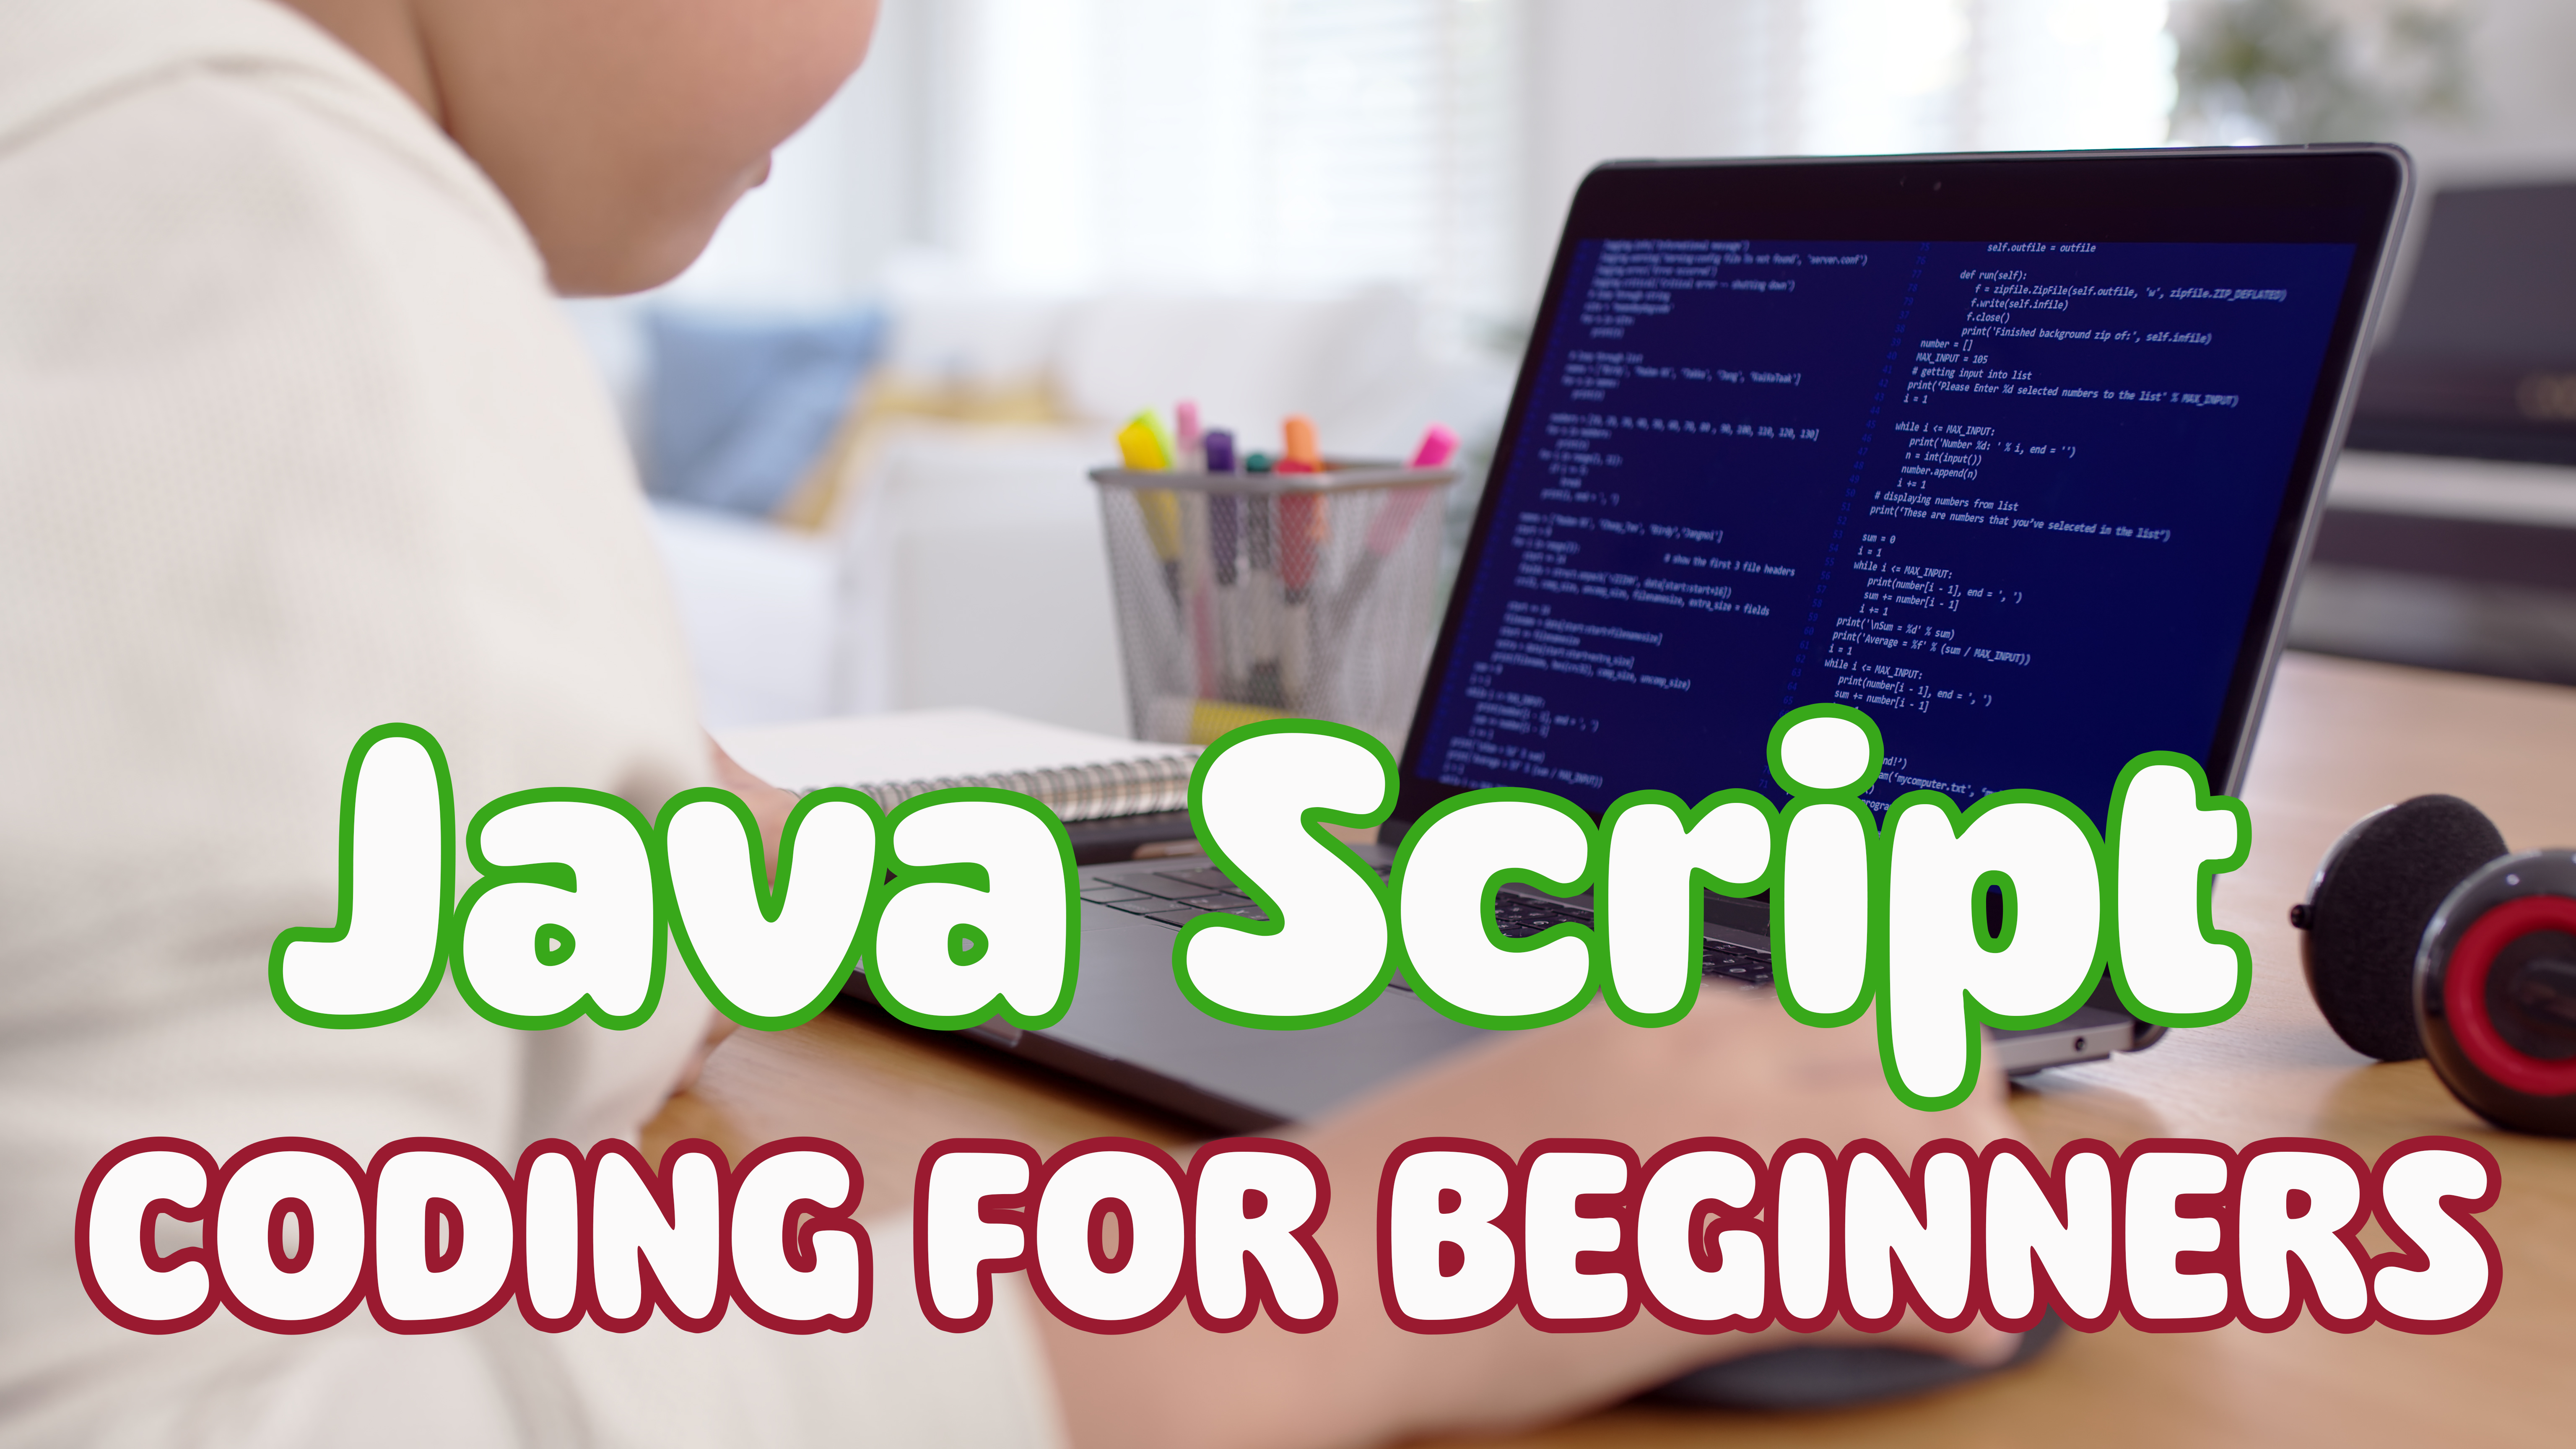 Introduction to Coding for Beginners (Java Script)